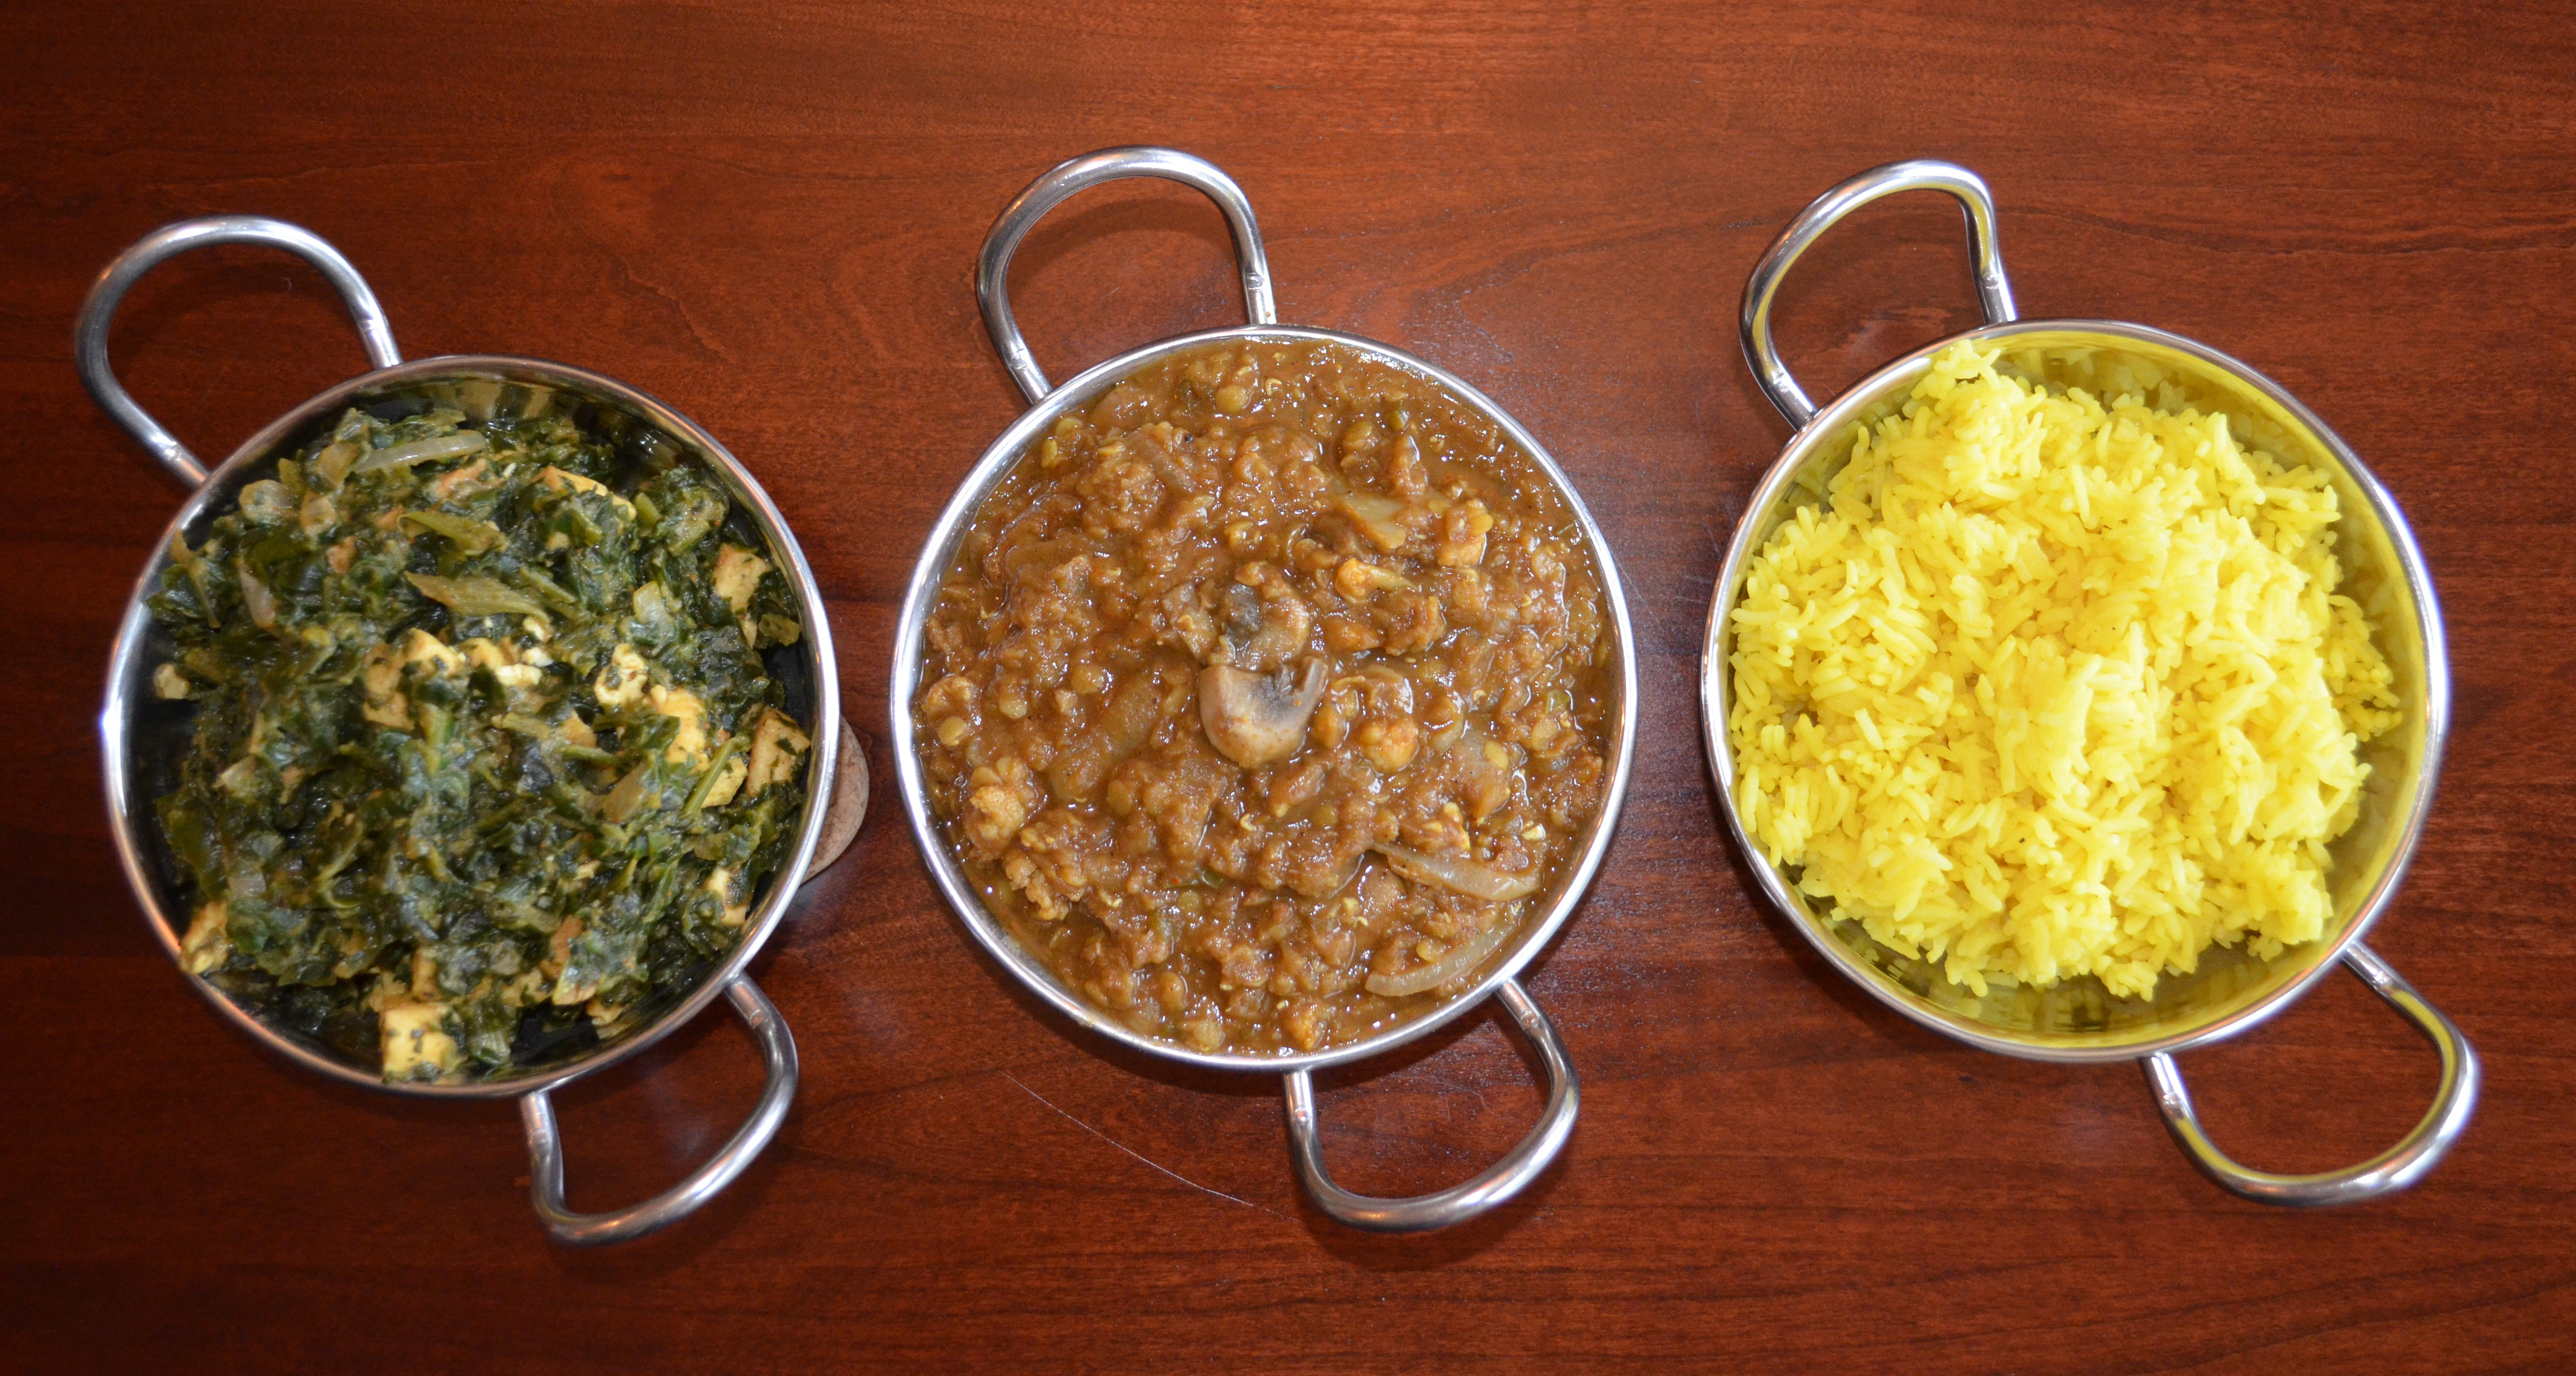 Three bowls of Indian curry and yellow rice on wooden table.